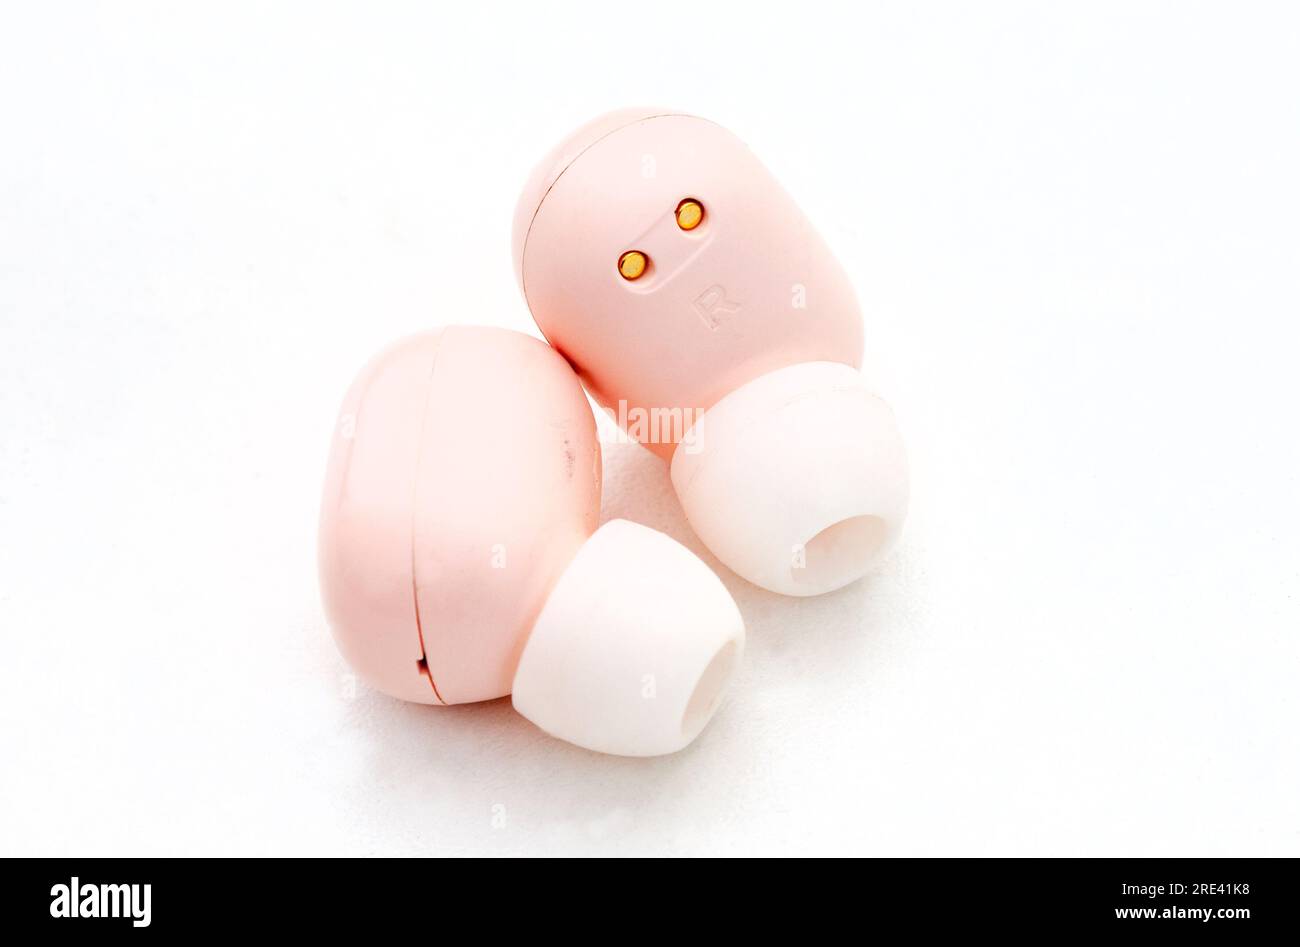 Light pink colored in-ear wireless earphones on white Stock Photo